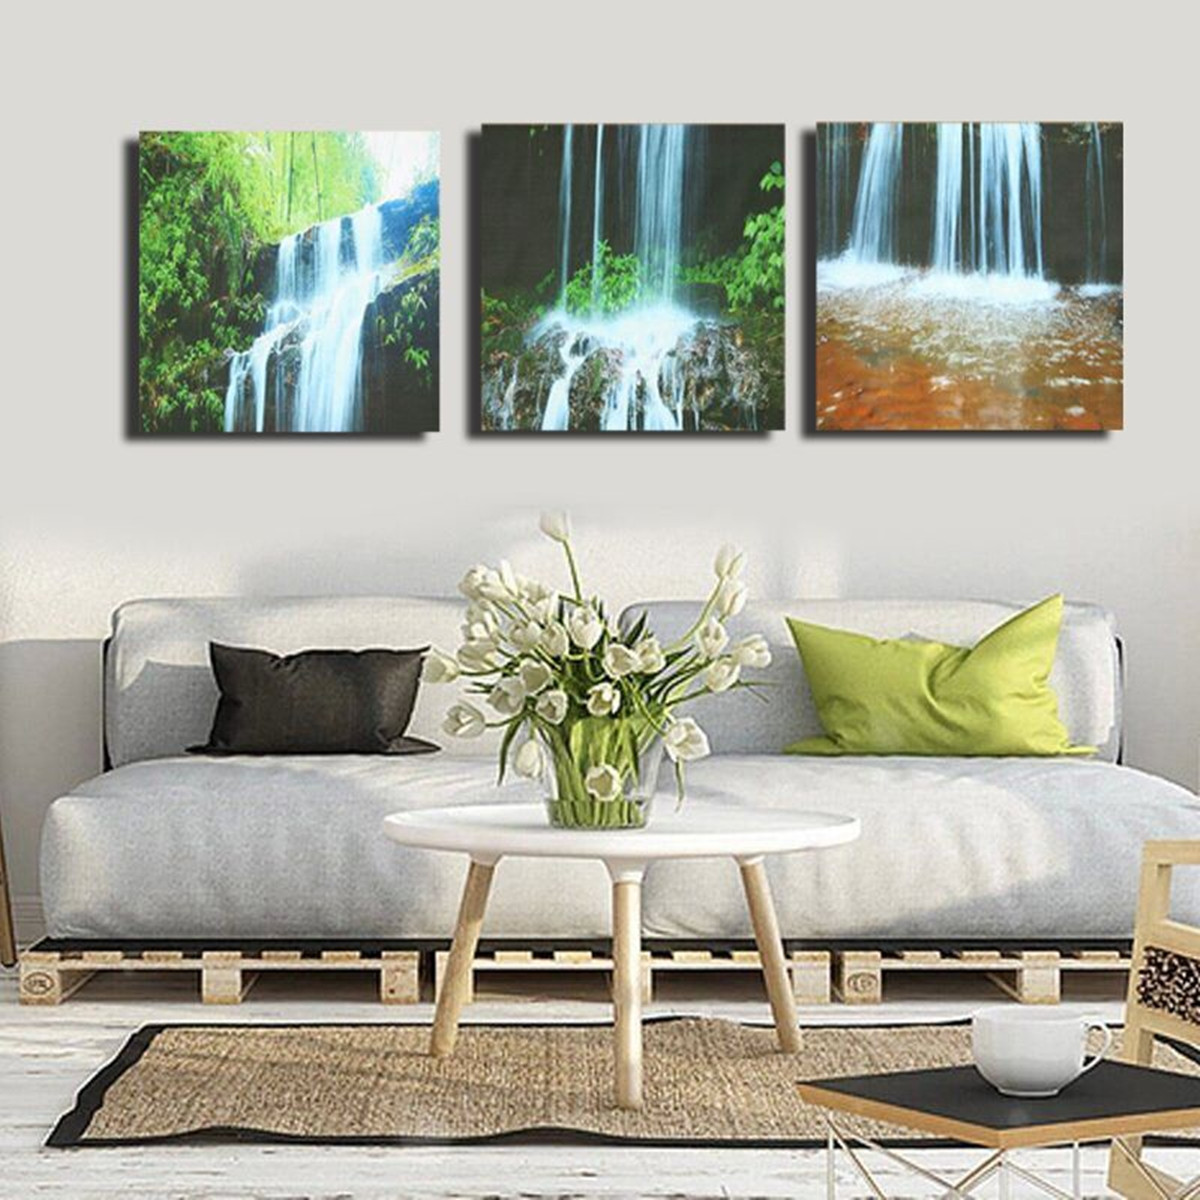 Canvas Painting For Living Room
 3 Cascade Waterfall Framed Print Painting Canvas